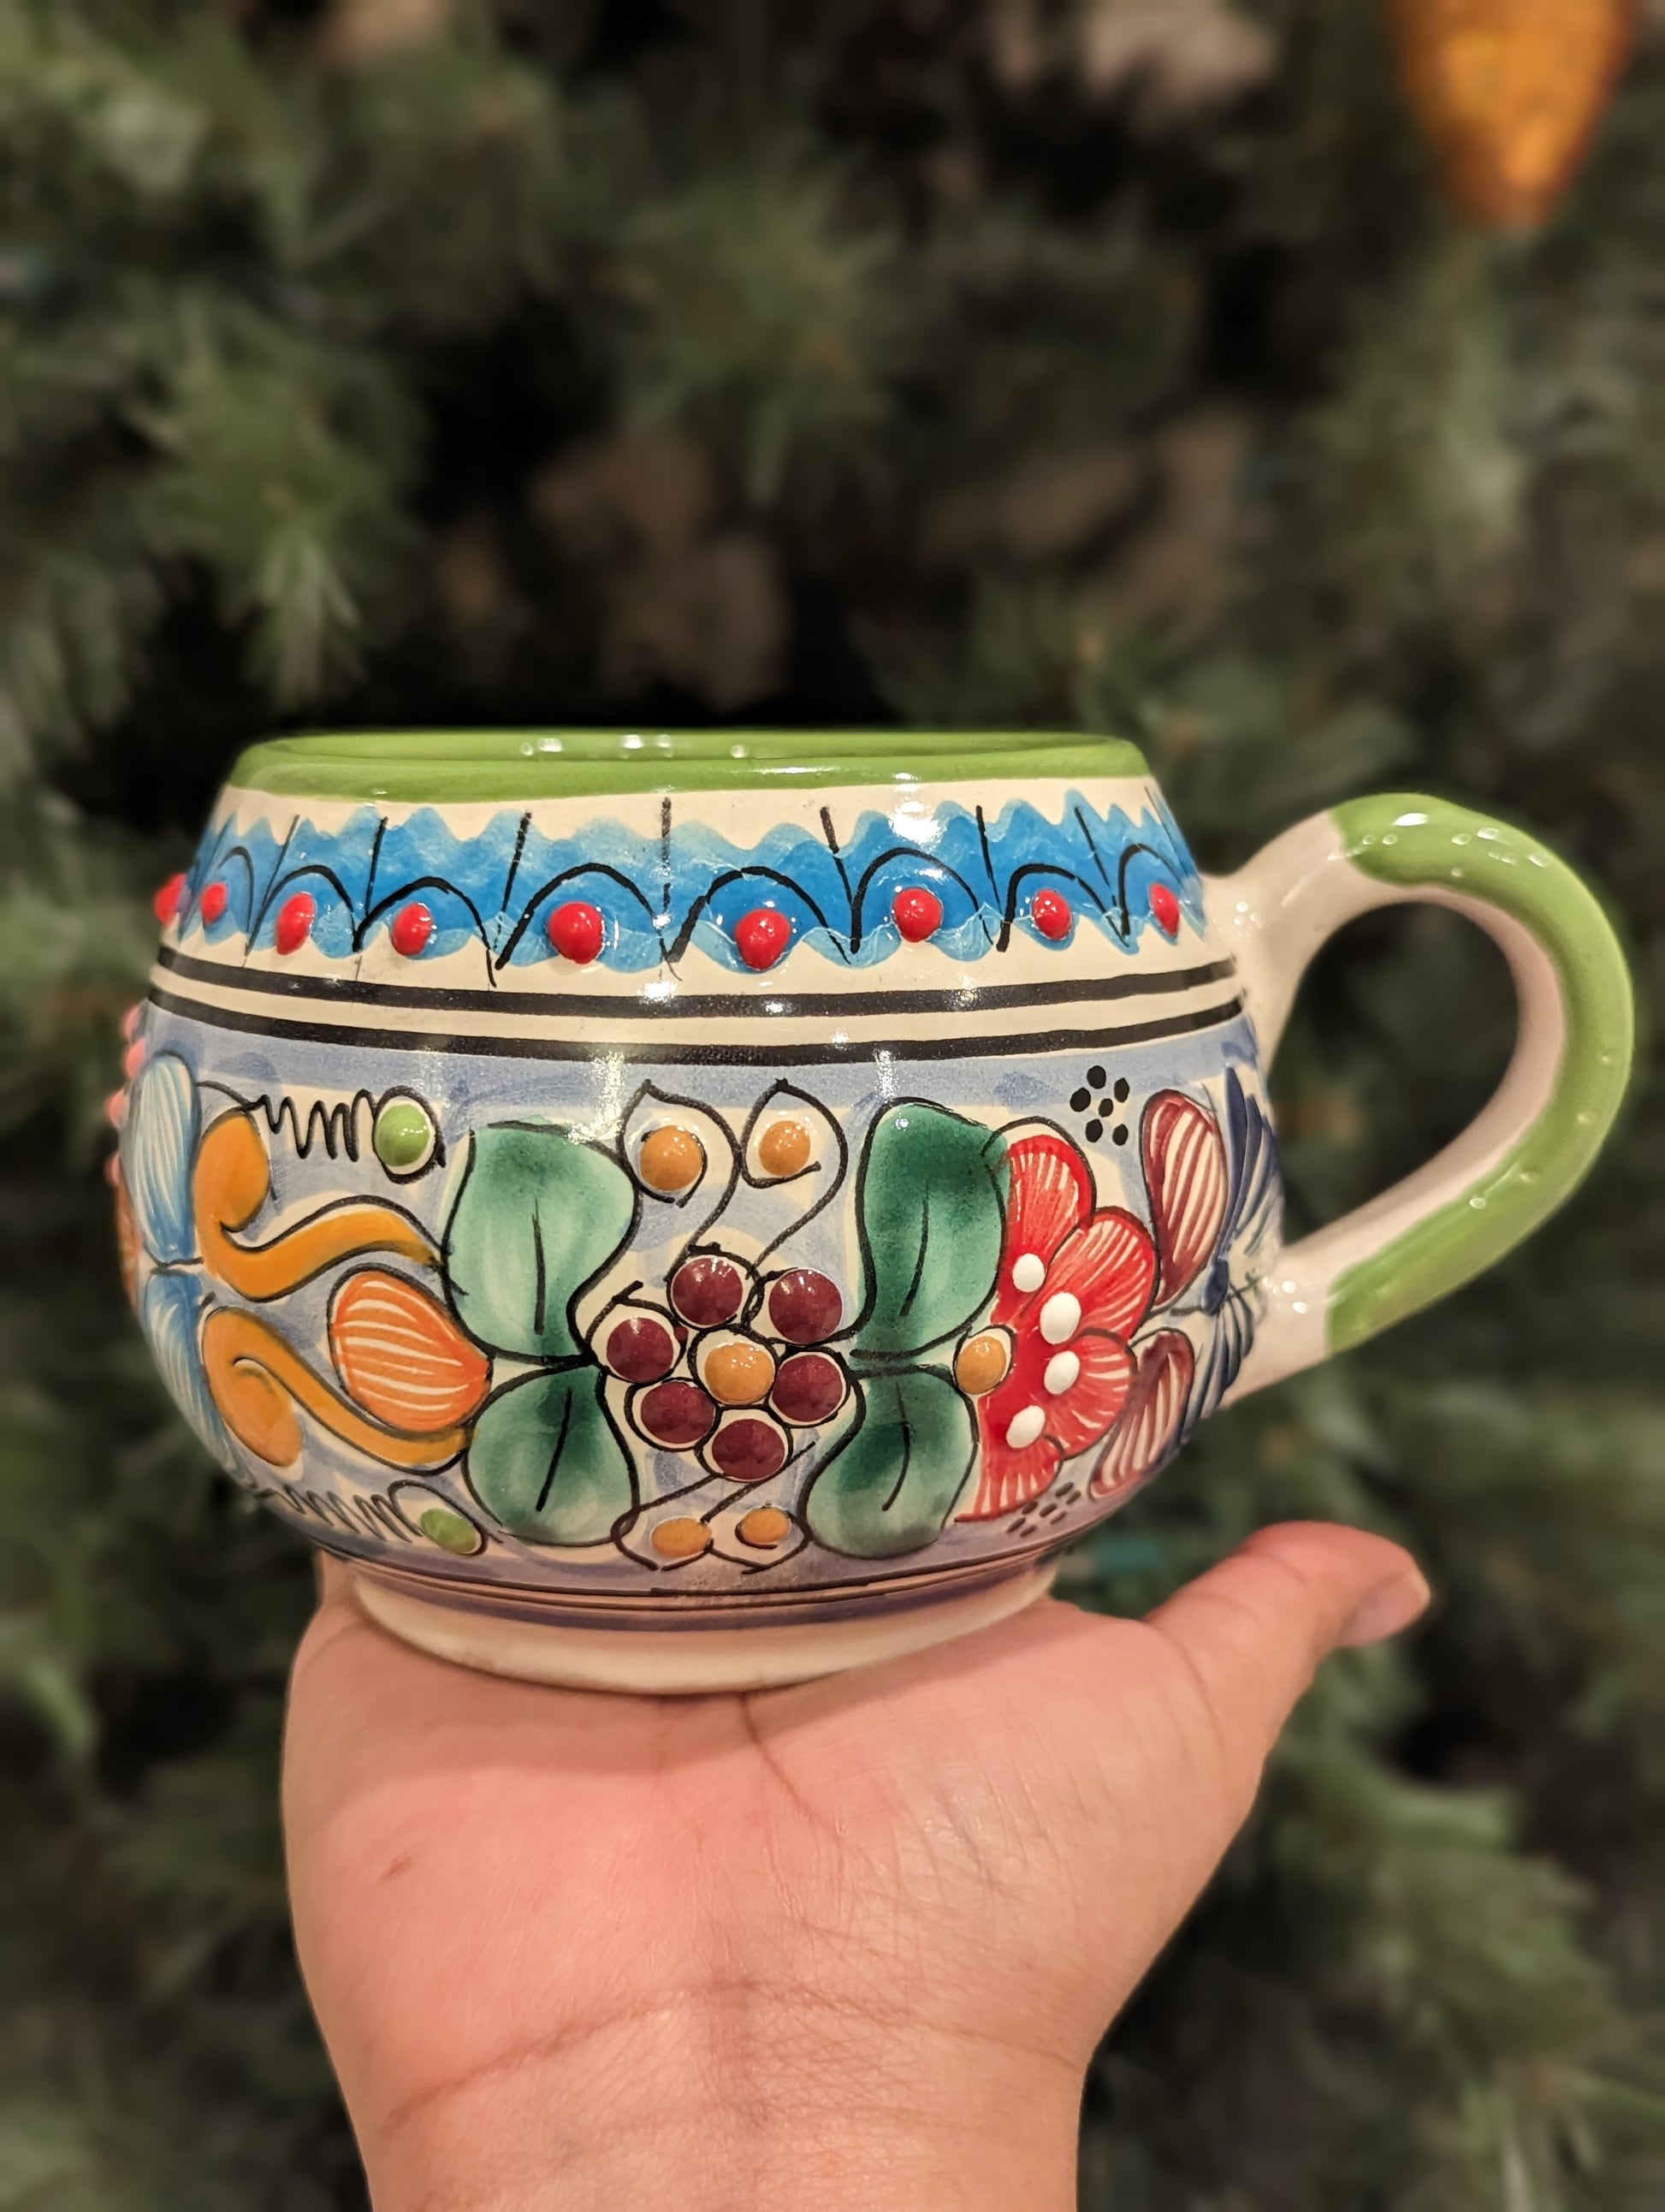 A hand holding an Artisanal candle in a beautiful multicolored talavera cup with a handle. Handcrafted by Artisan in Puebla, Mexico. 100% All Natural Soy Candle. Reuse the talavera as home decor or storage.